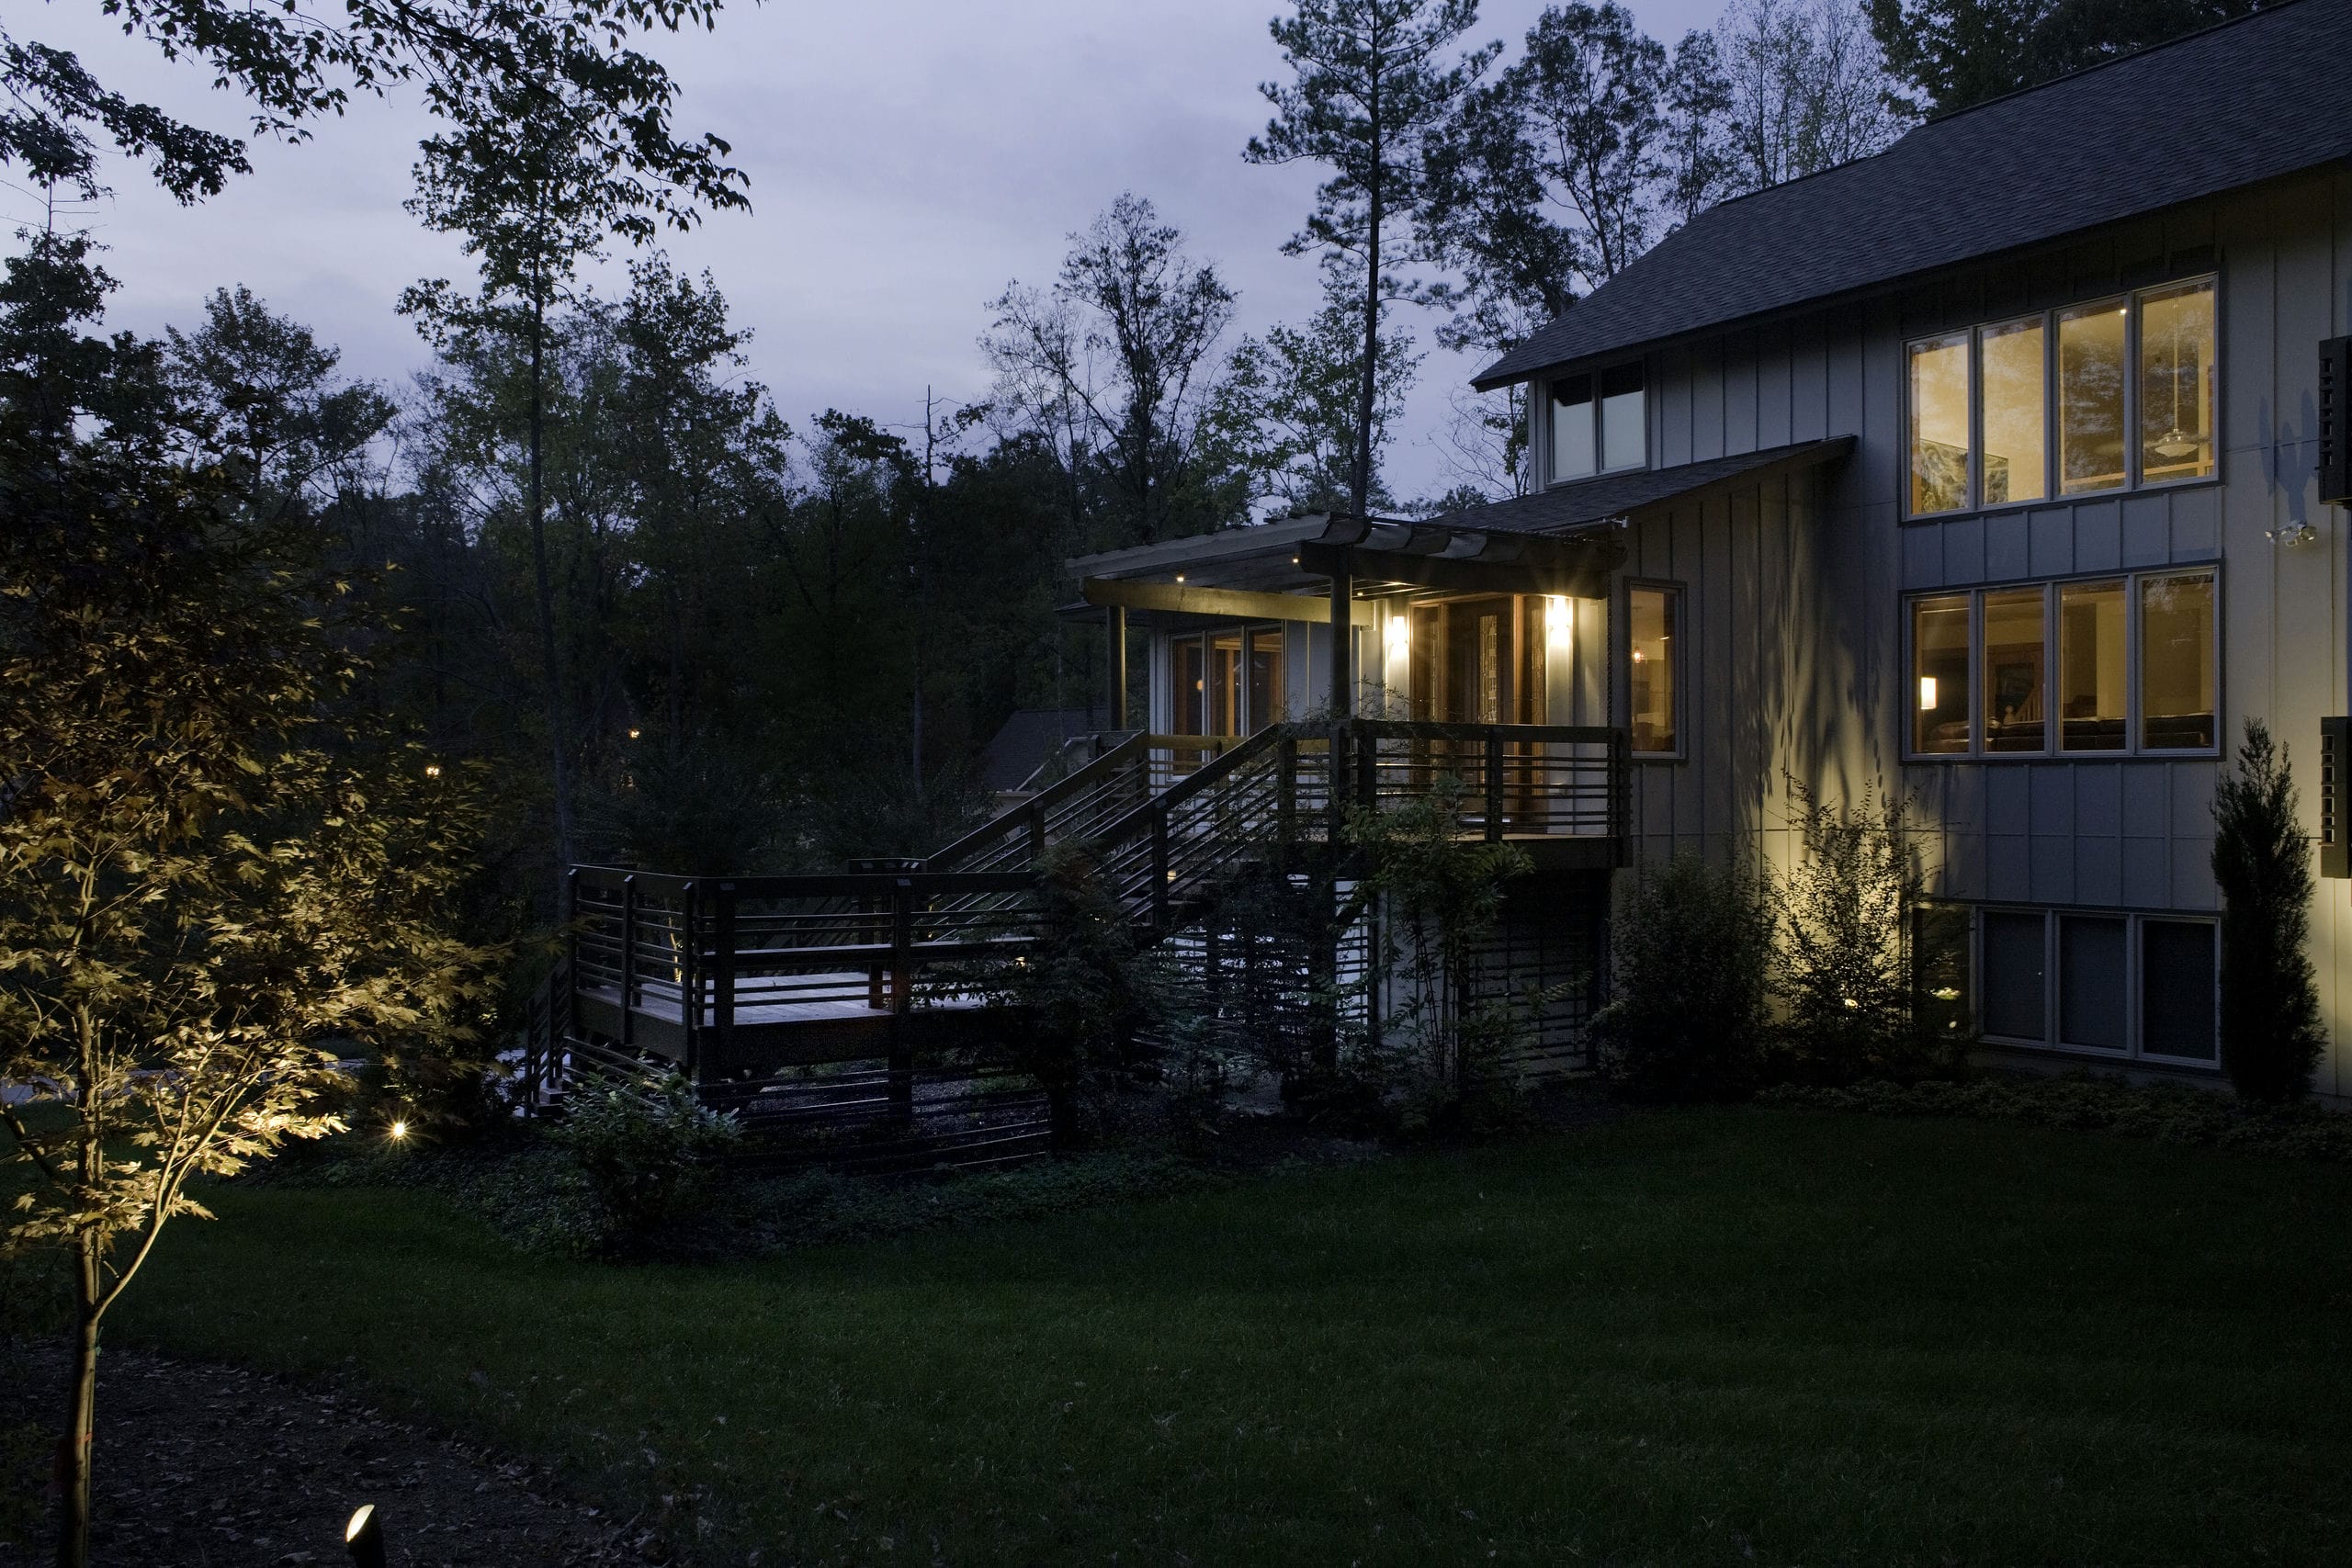 A nighttime shot showing exterior stairs leading up to trellis-covered entrance as landscape lighting and warm lighting from within the house illuminate the image.